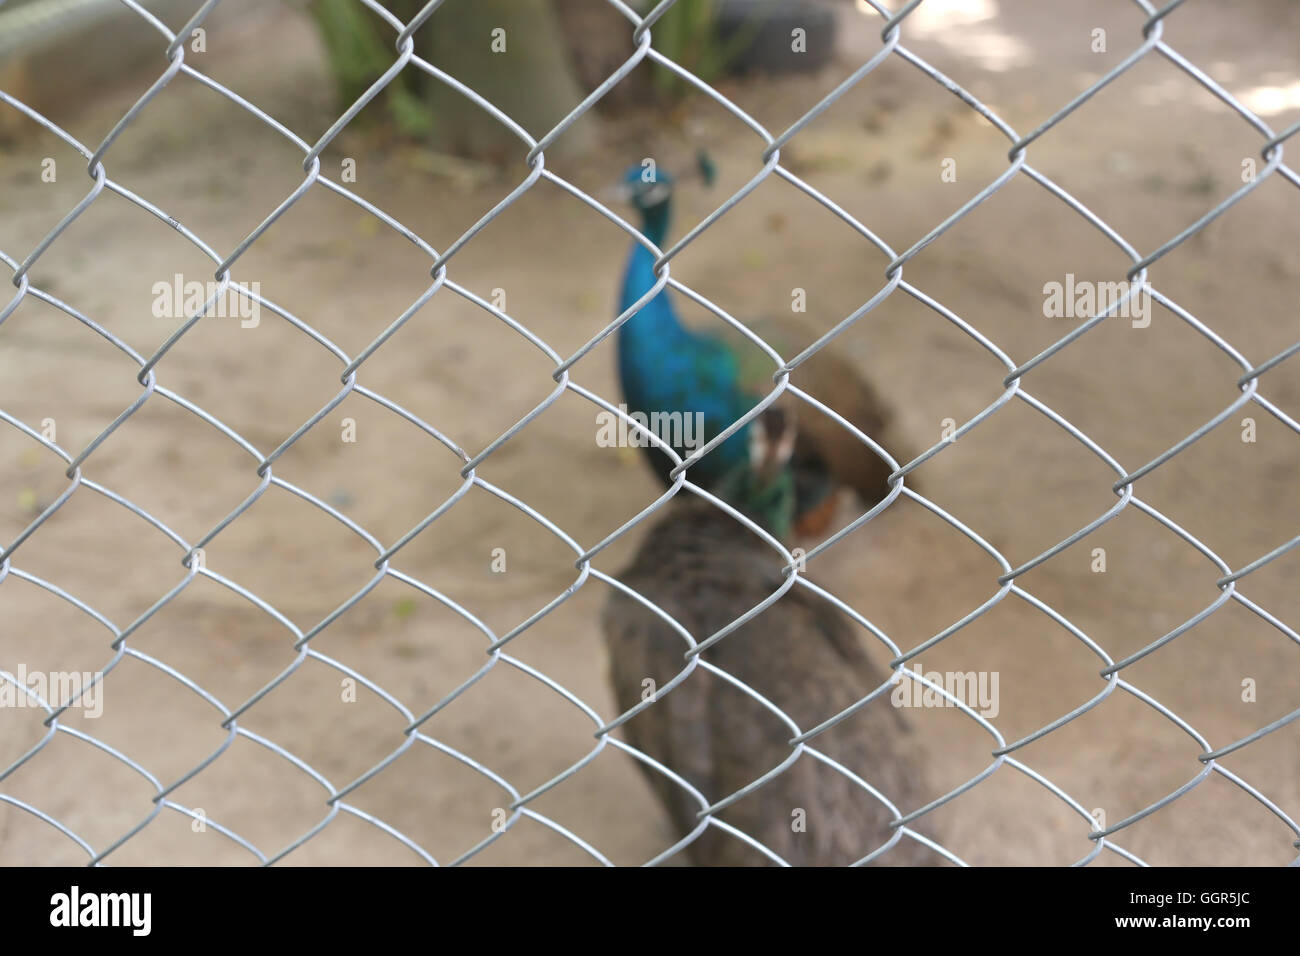 Peacock of conserve bird are trapped inside a cage concept of capturing wild animals. Stock Photo